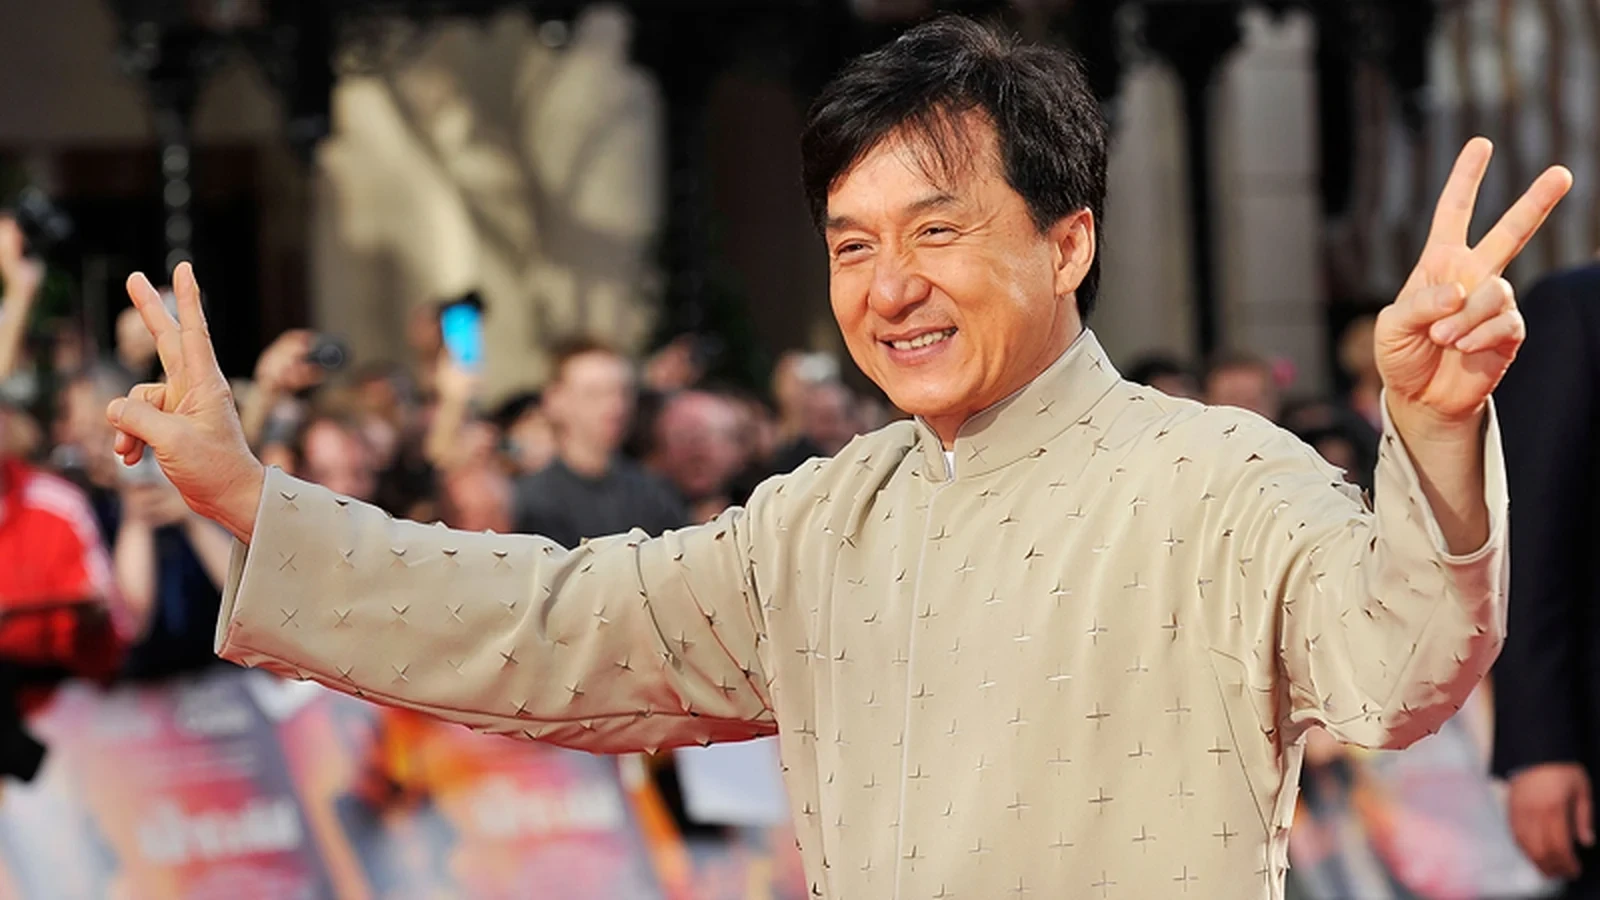 Jackie Chan is a miserable failure when it comes to promoting products